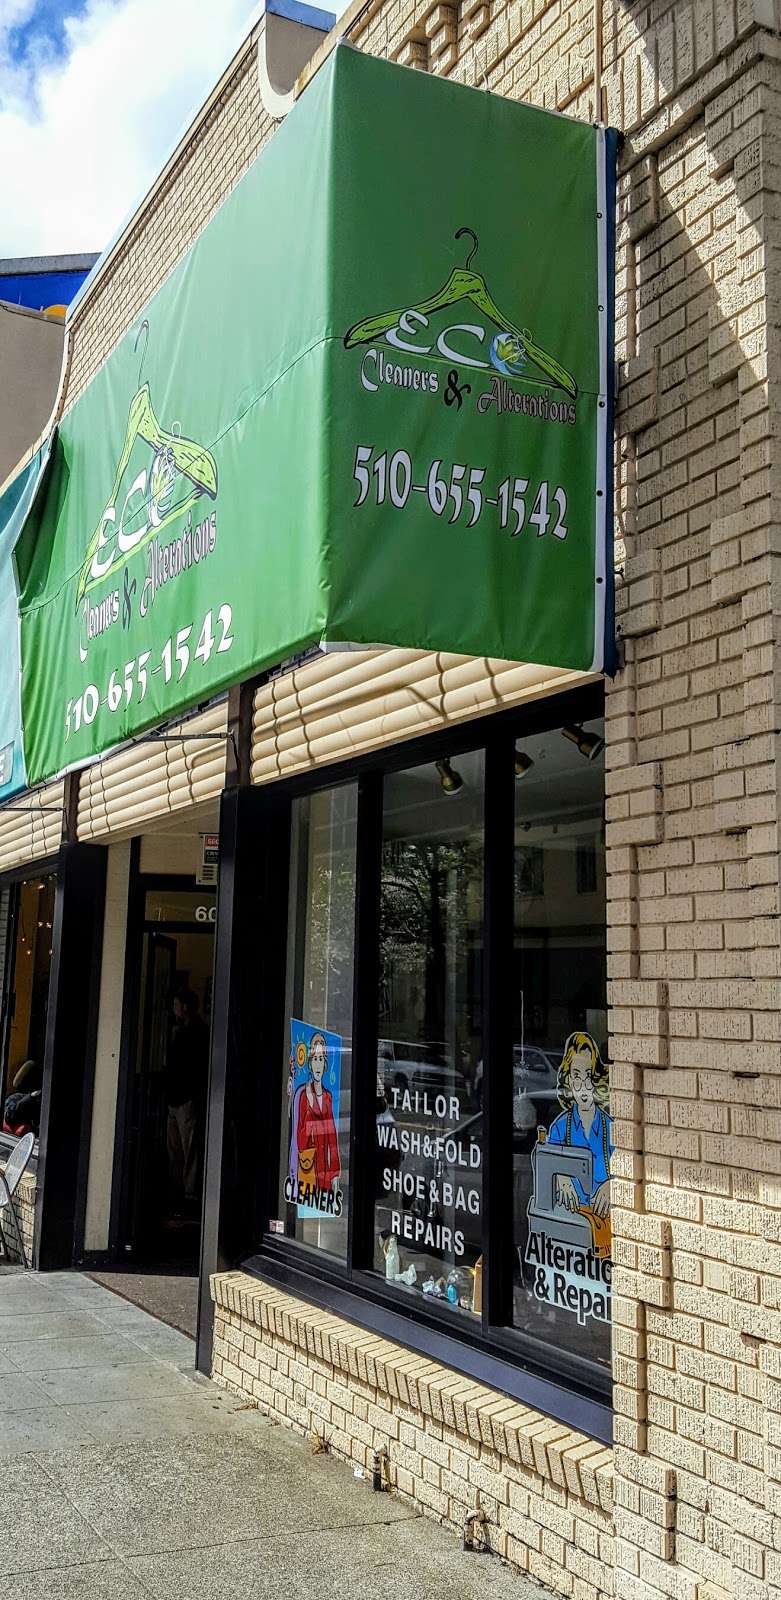 Eco Dry Cleaners & Alterations | 6025 College Ave, Oakland, CA 94618 | Phone: (510) 655-1125